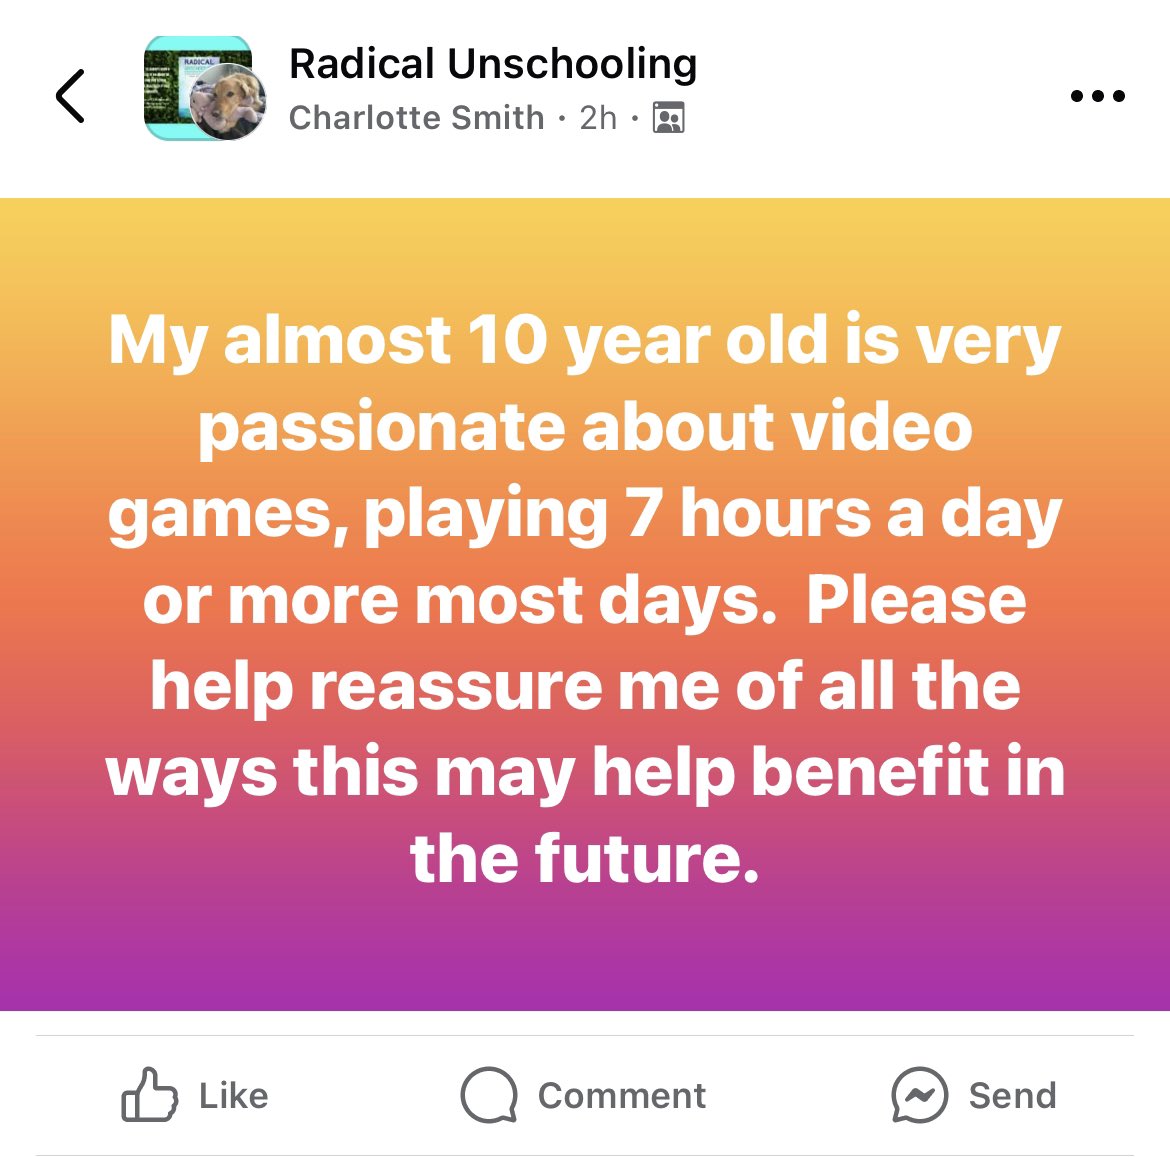 screenshot - Radical O Radical Unschooling Charlotte Smith 2h My almost 10 year old is very passionate about video games, playing 7 hours a day or more most days. Please help reassure me of all the ways this may help benefit in the future. Comment Send